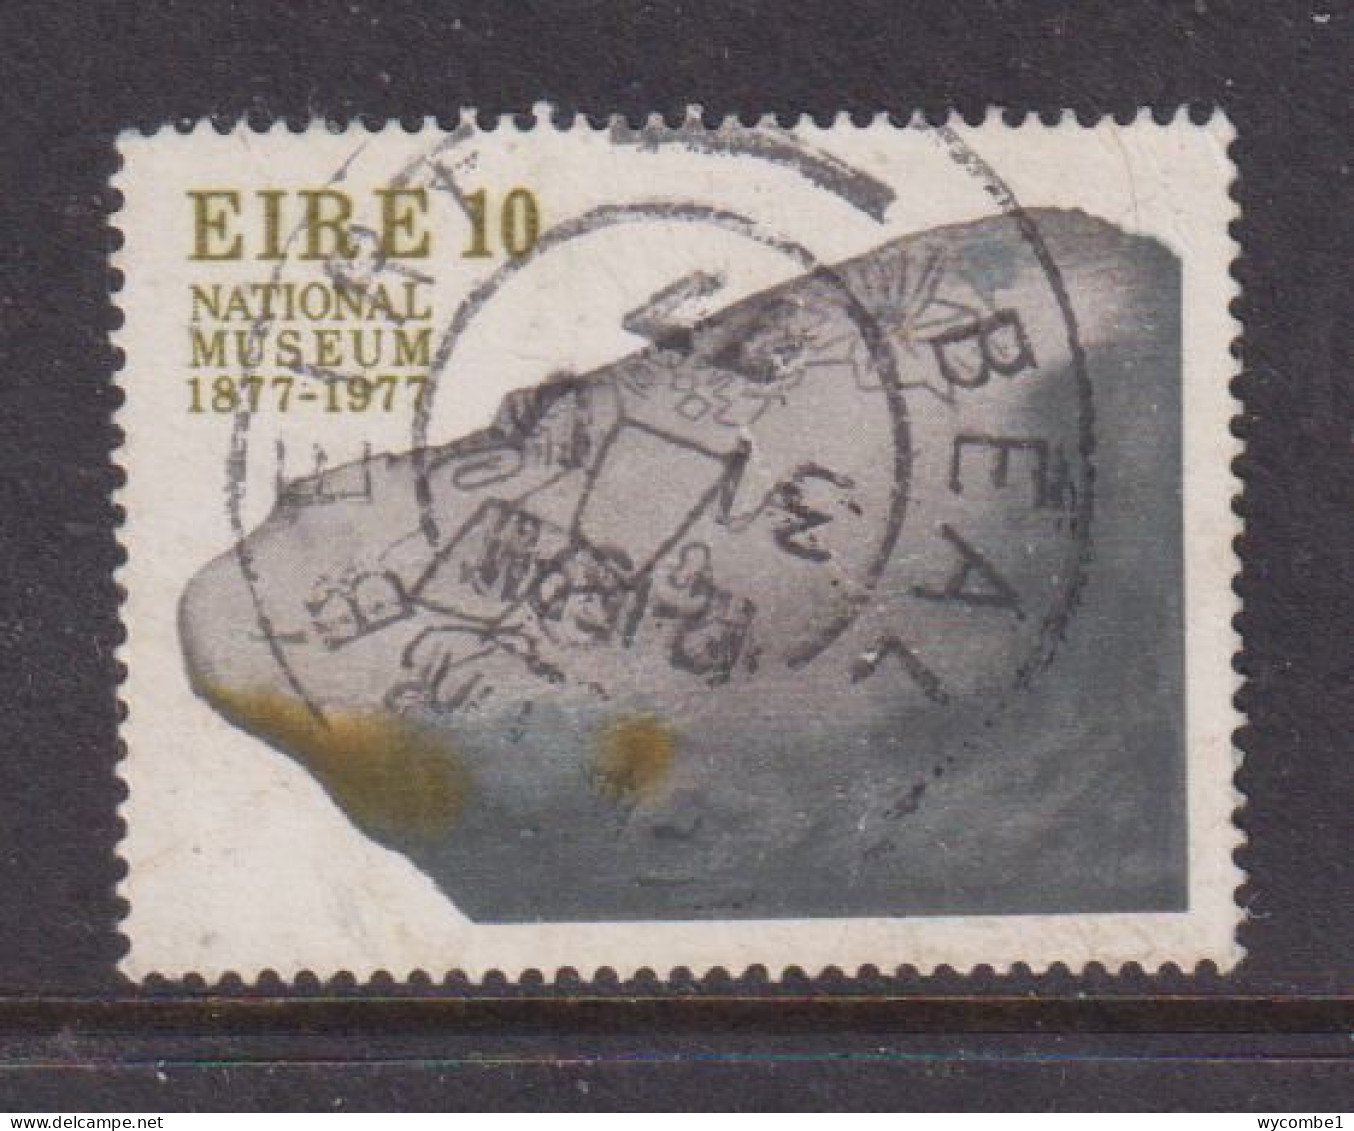 IRELAND - 1977  National Museum  10p  Used As Scan - Usati